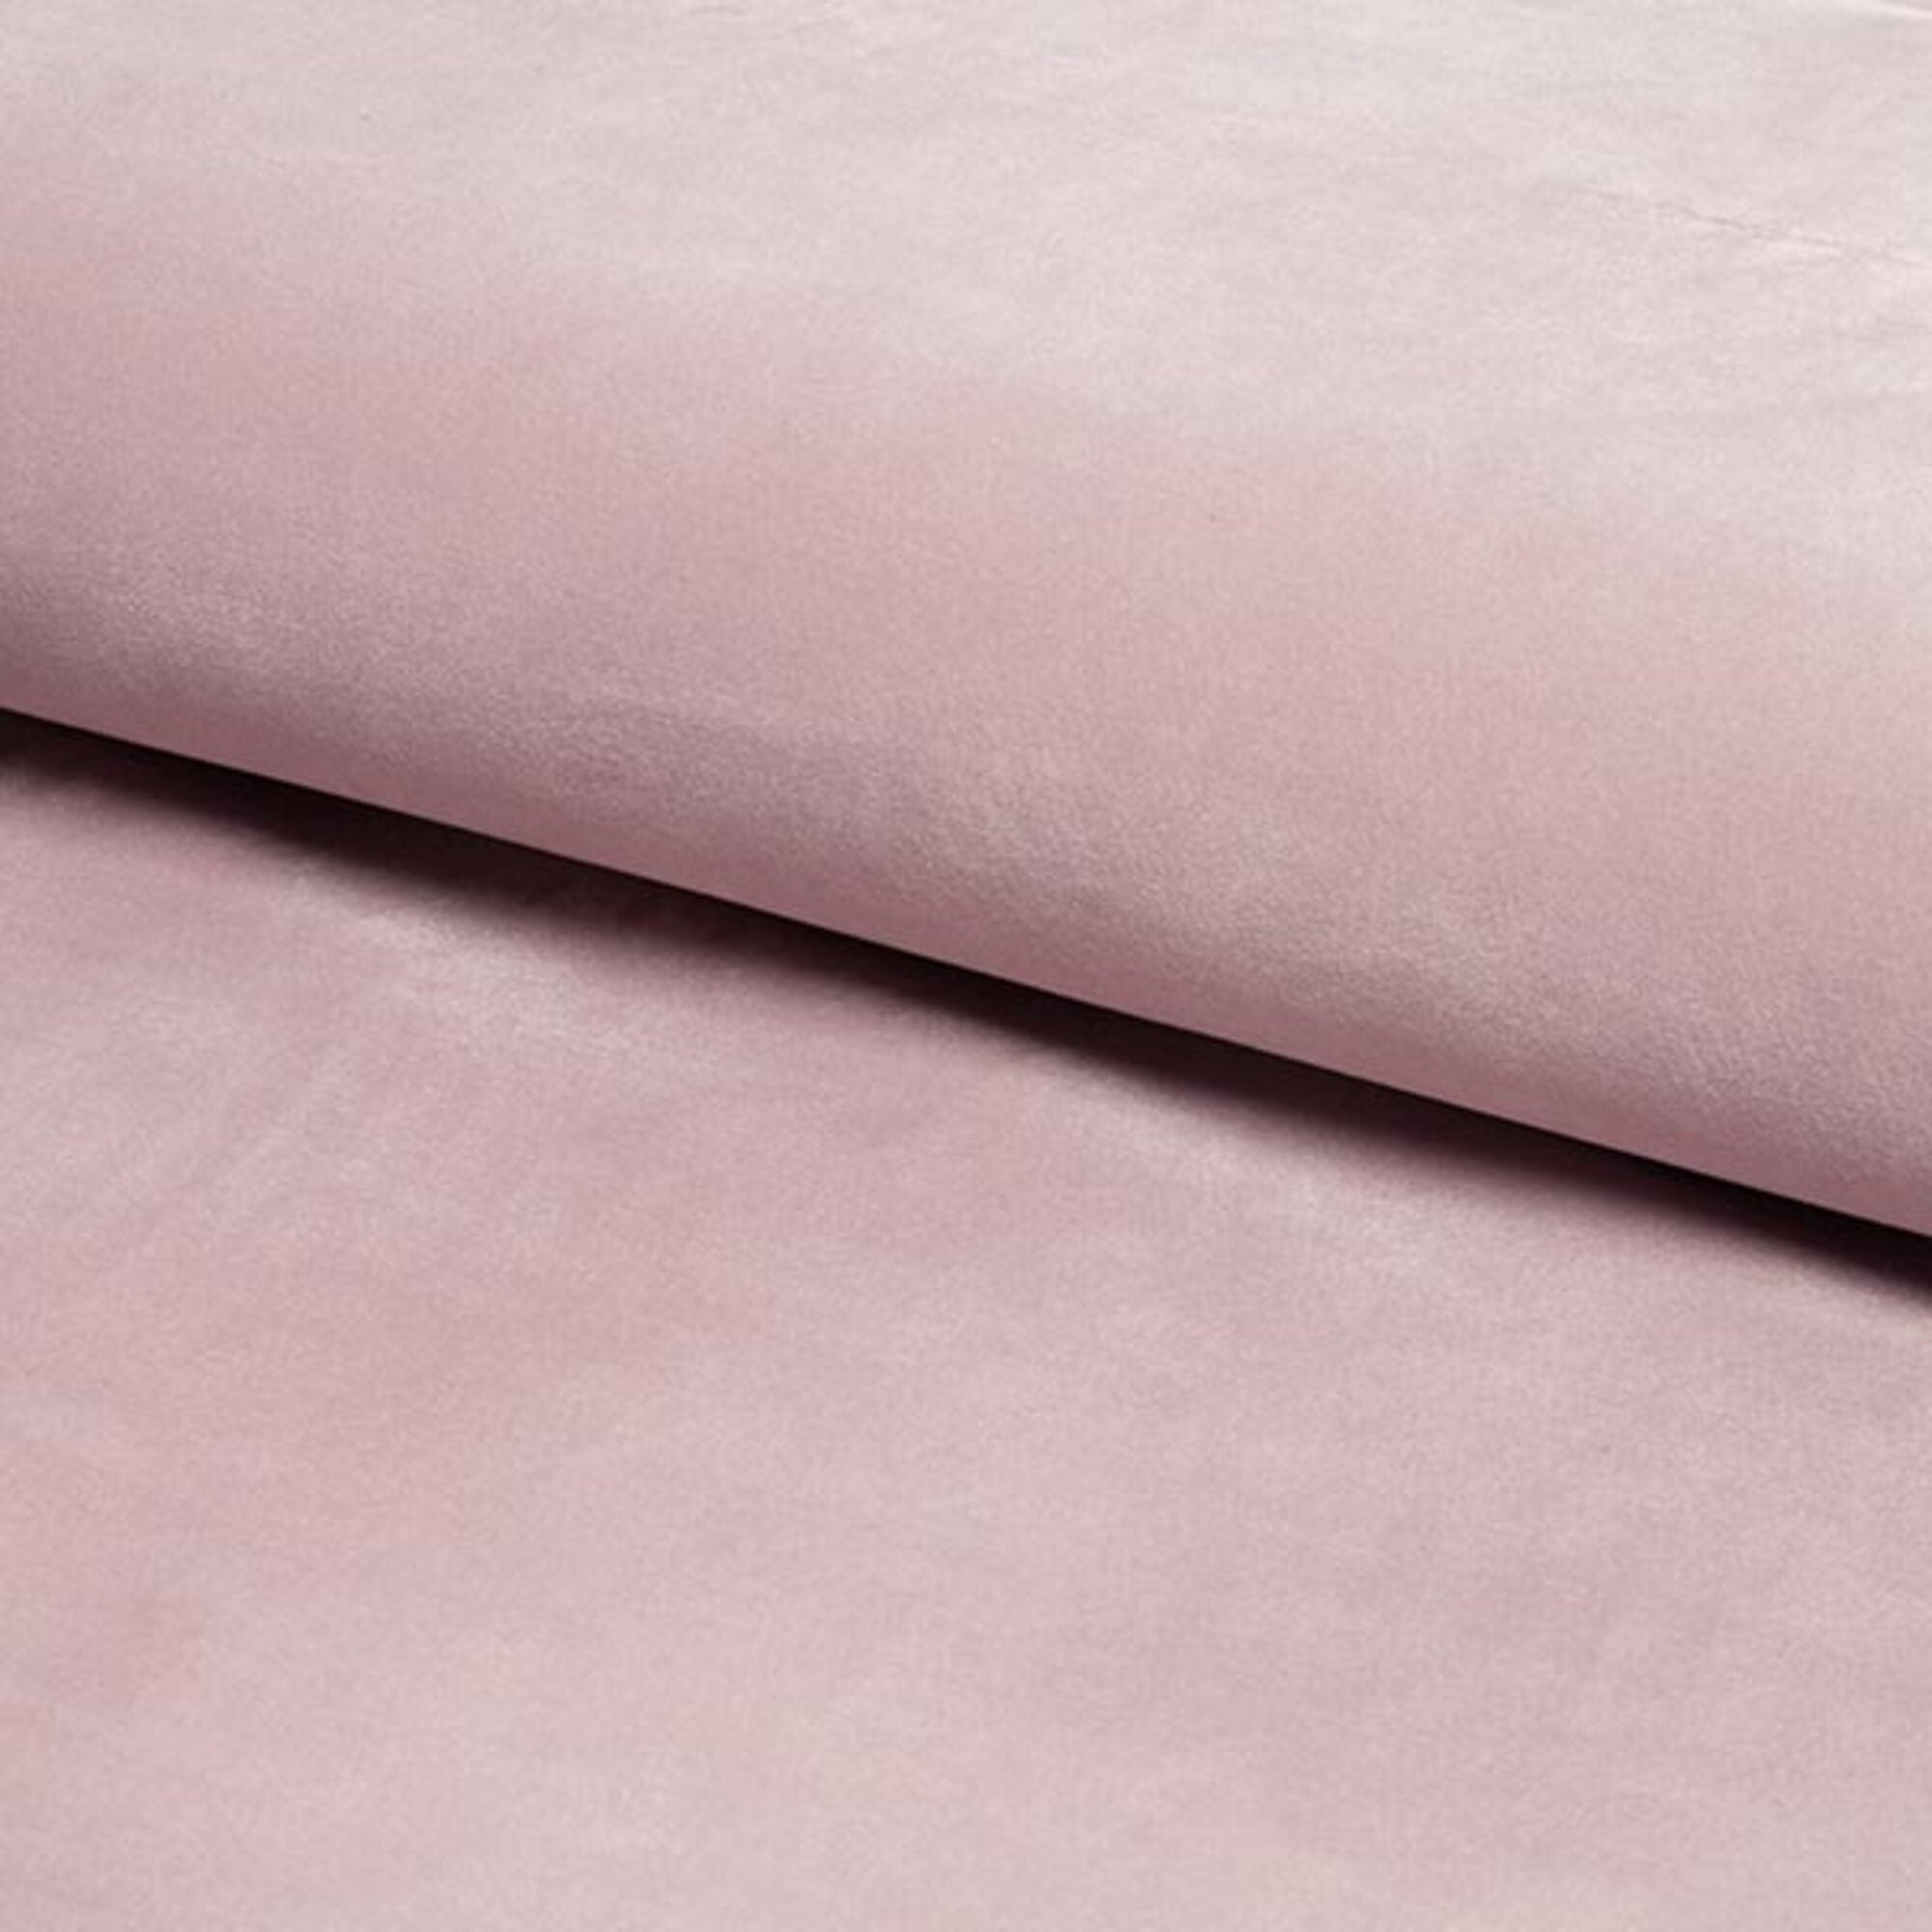 Soft Plush Velvet Upholstery Fabric for Furniture and Crafts